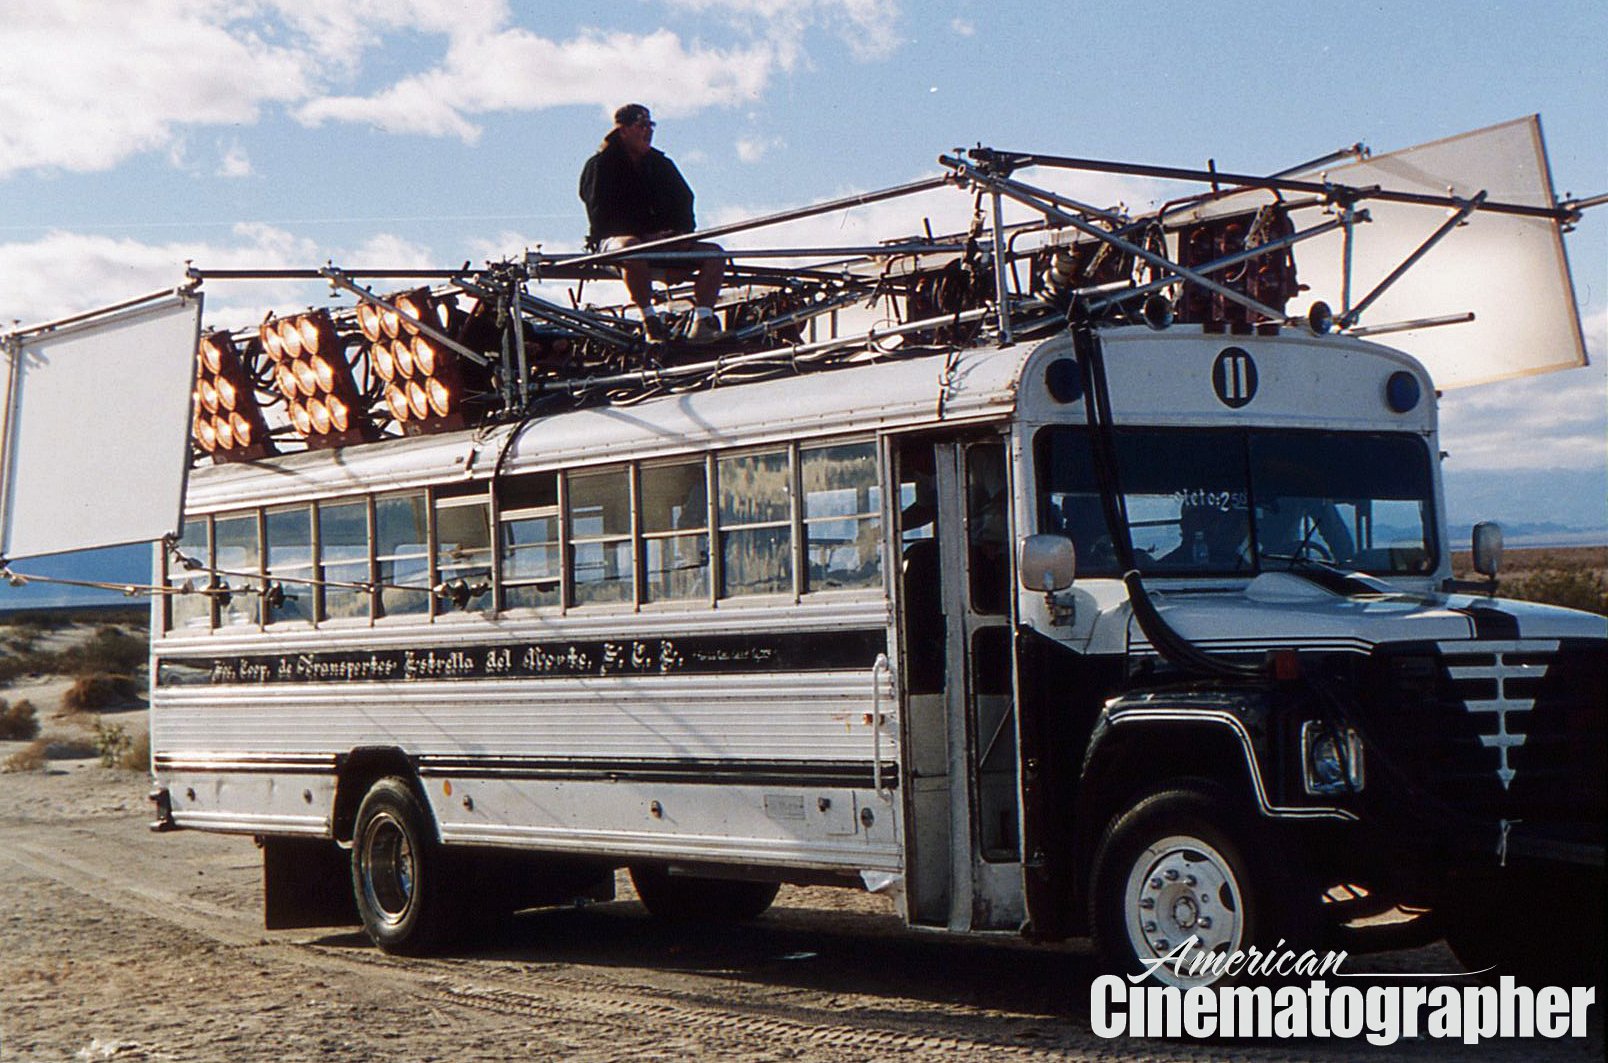 Finding himself kidnapped and dumped in Mexico, Van Orton rides home in a dilapidated bus. Saves had gaffer Miranda and key grip Michael Coo rig the vehicle with Maxi-Brutes bouncing into Luann panels. 